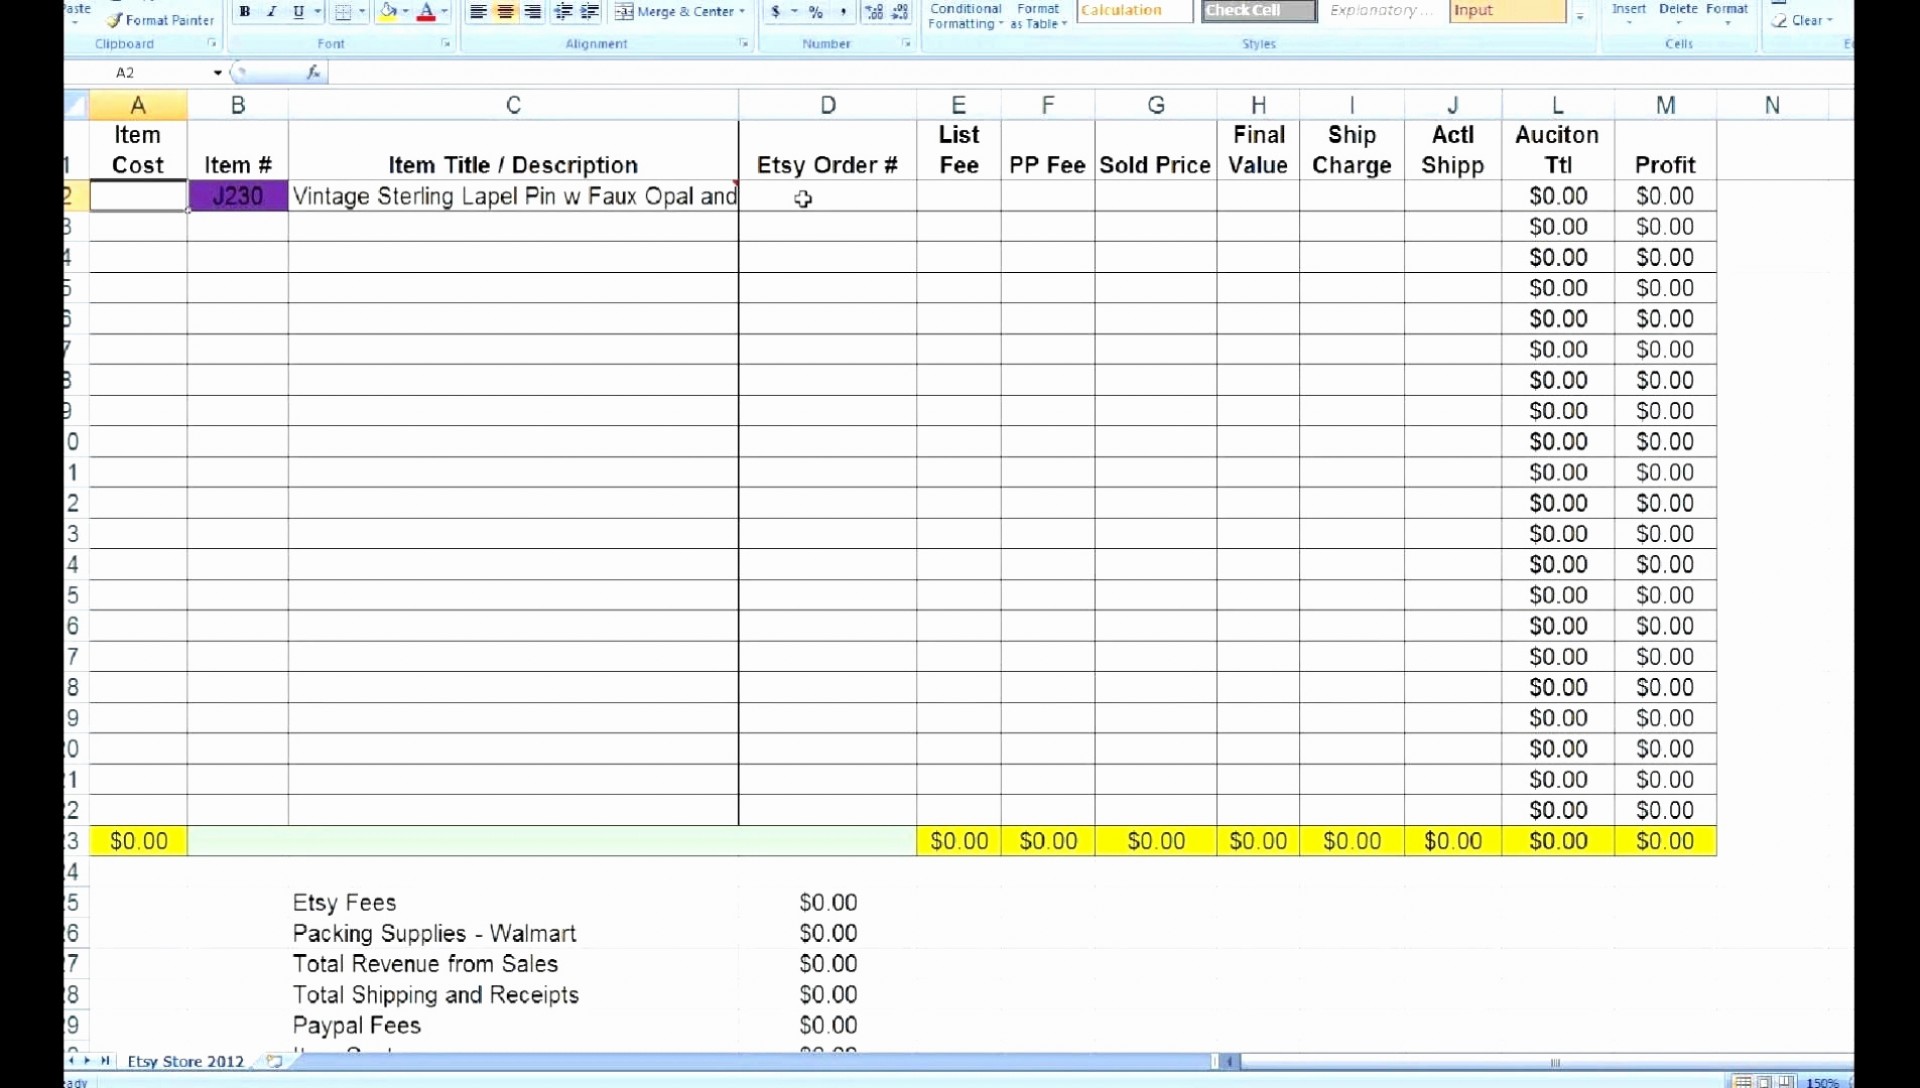 Sample Of Weight Loss Excel Template Inside Weight Loss Excel Template Format